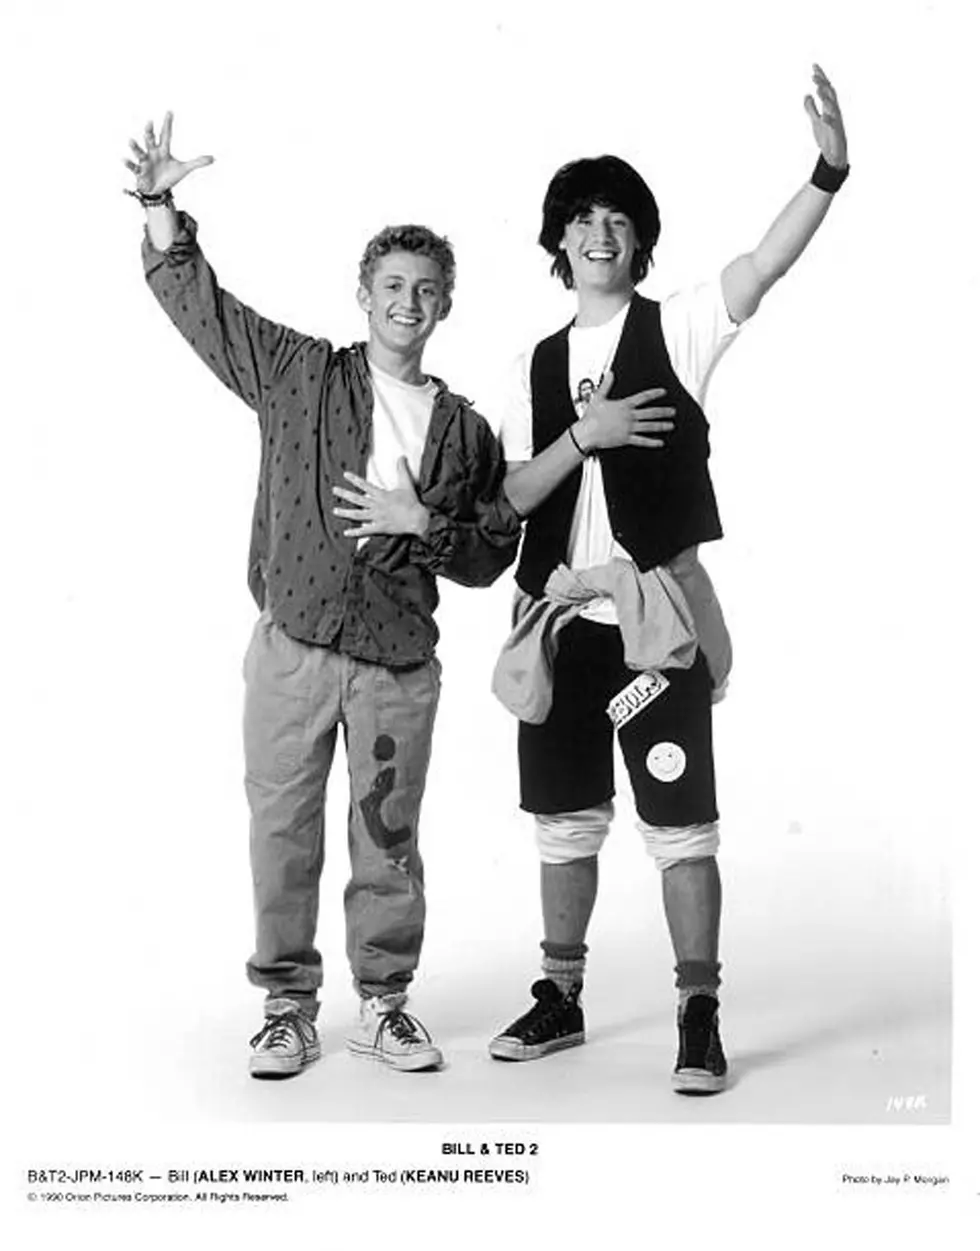 The Story about Bill and Ted